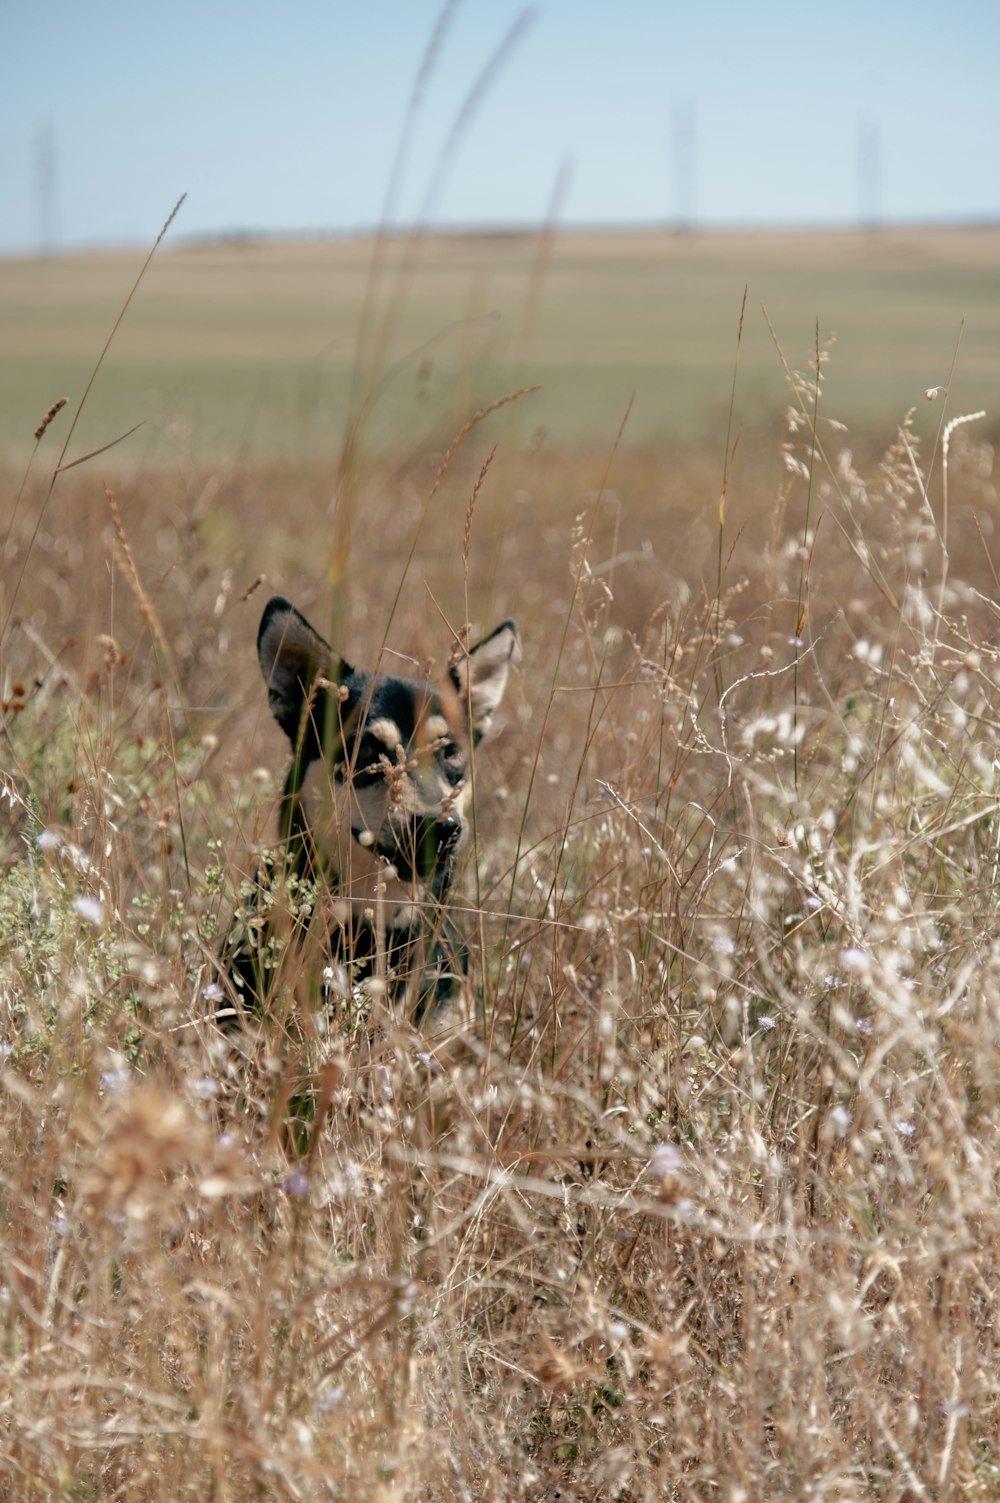 a small animal in a field of tall grass